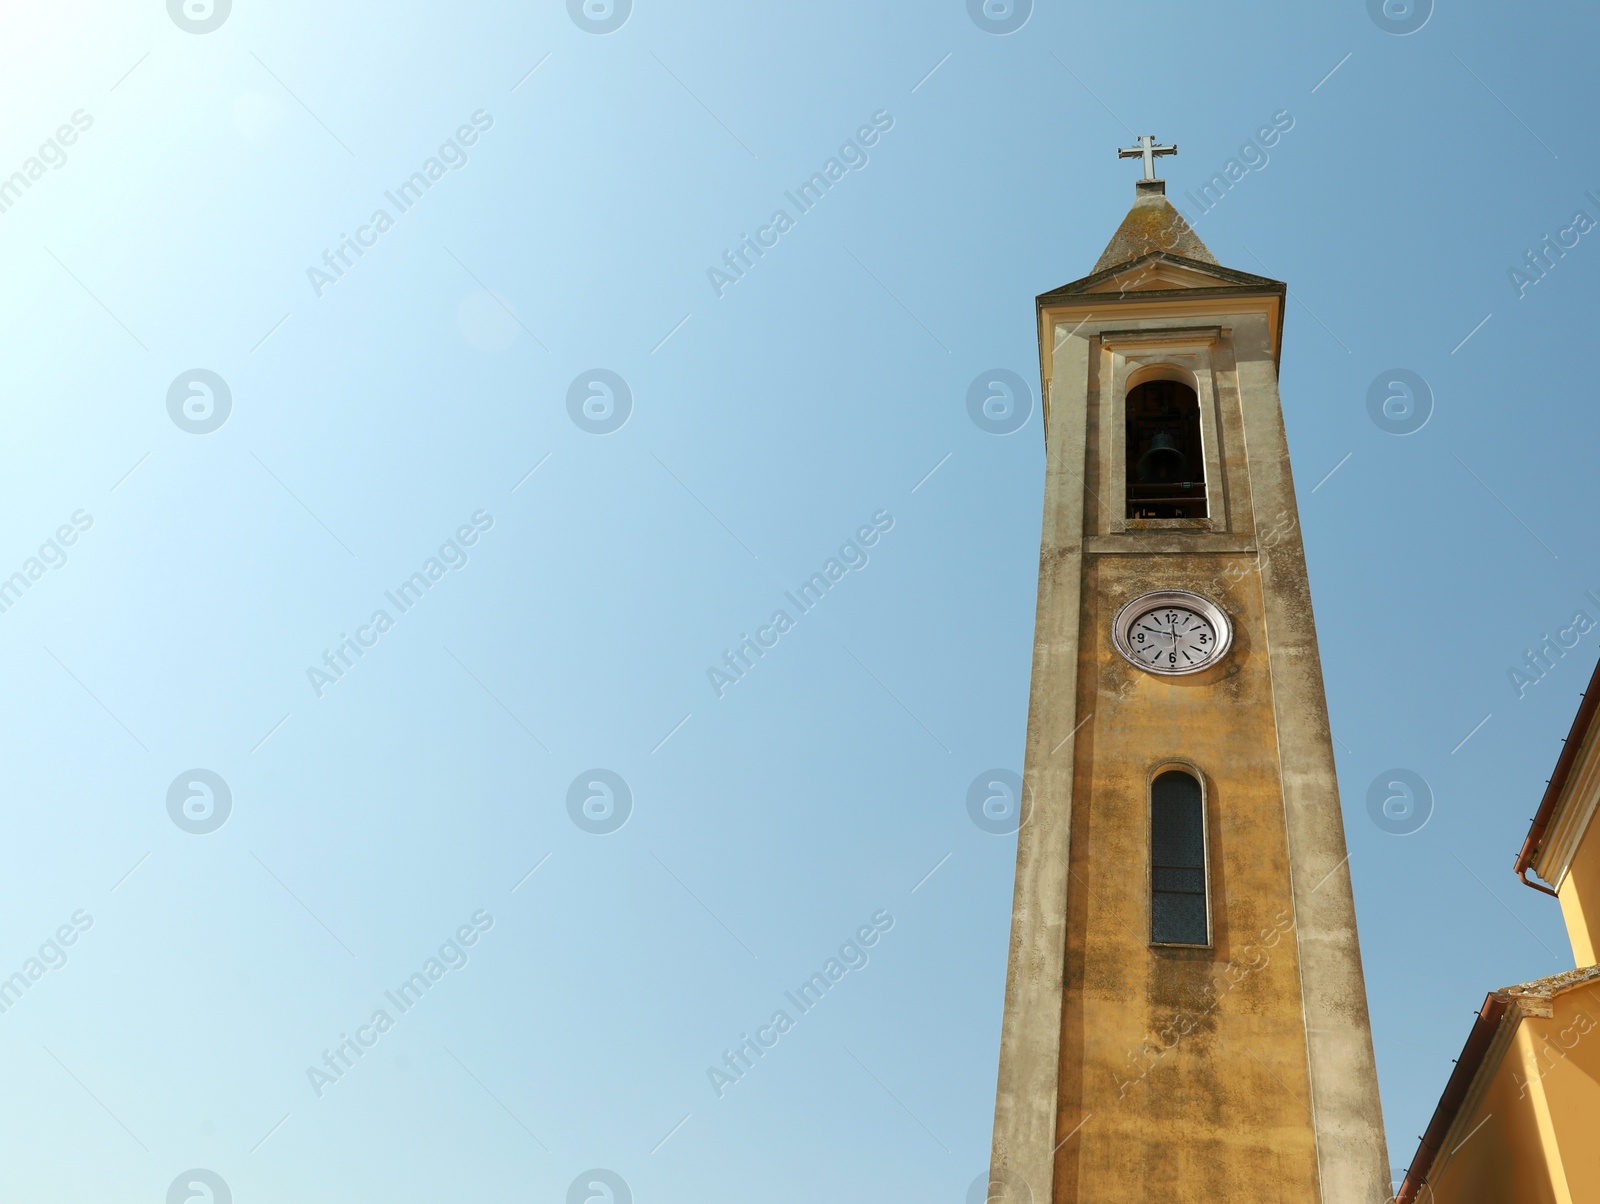 Photo of Beautiful church steeple with clock on sunny day, space for text